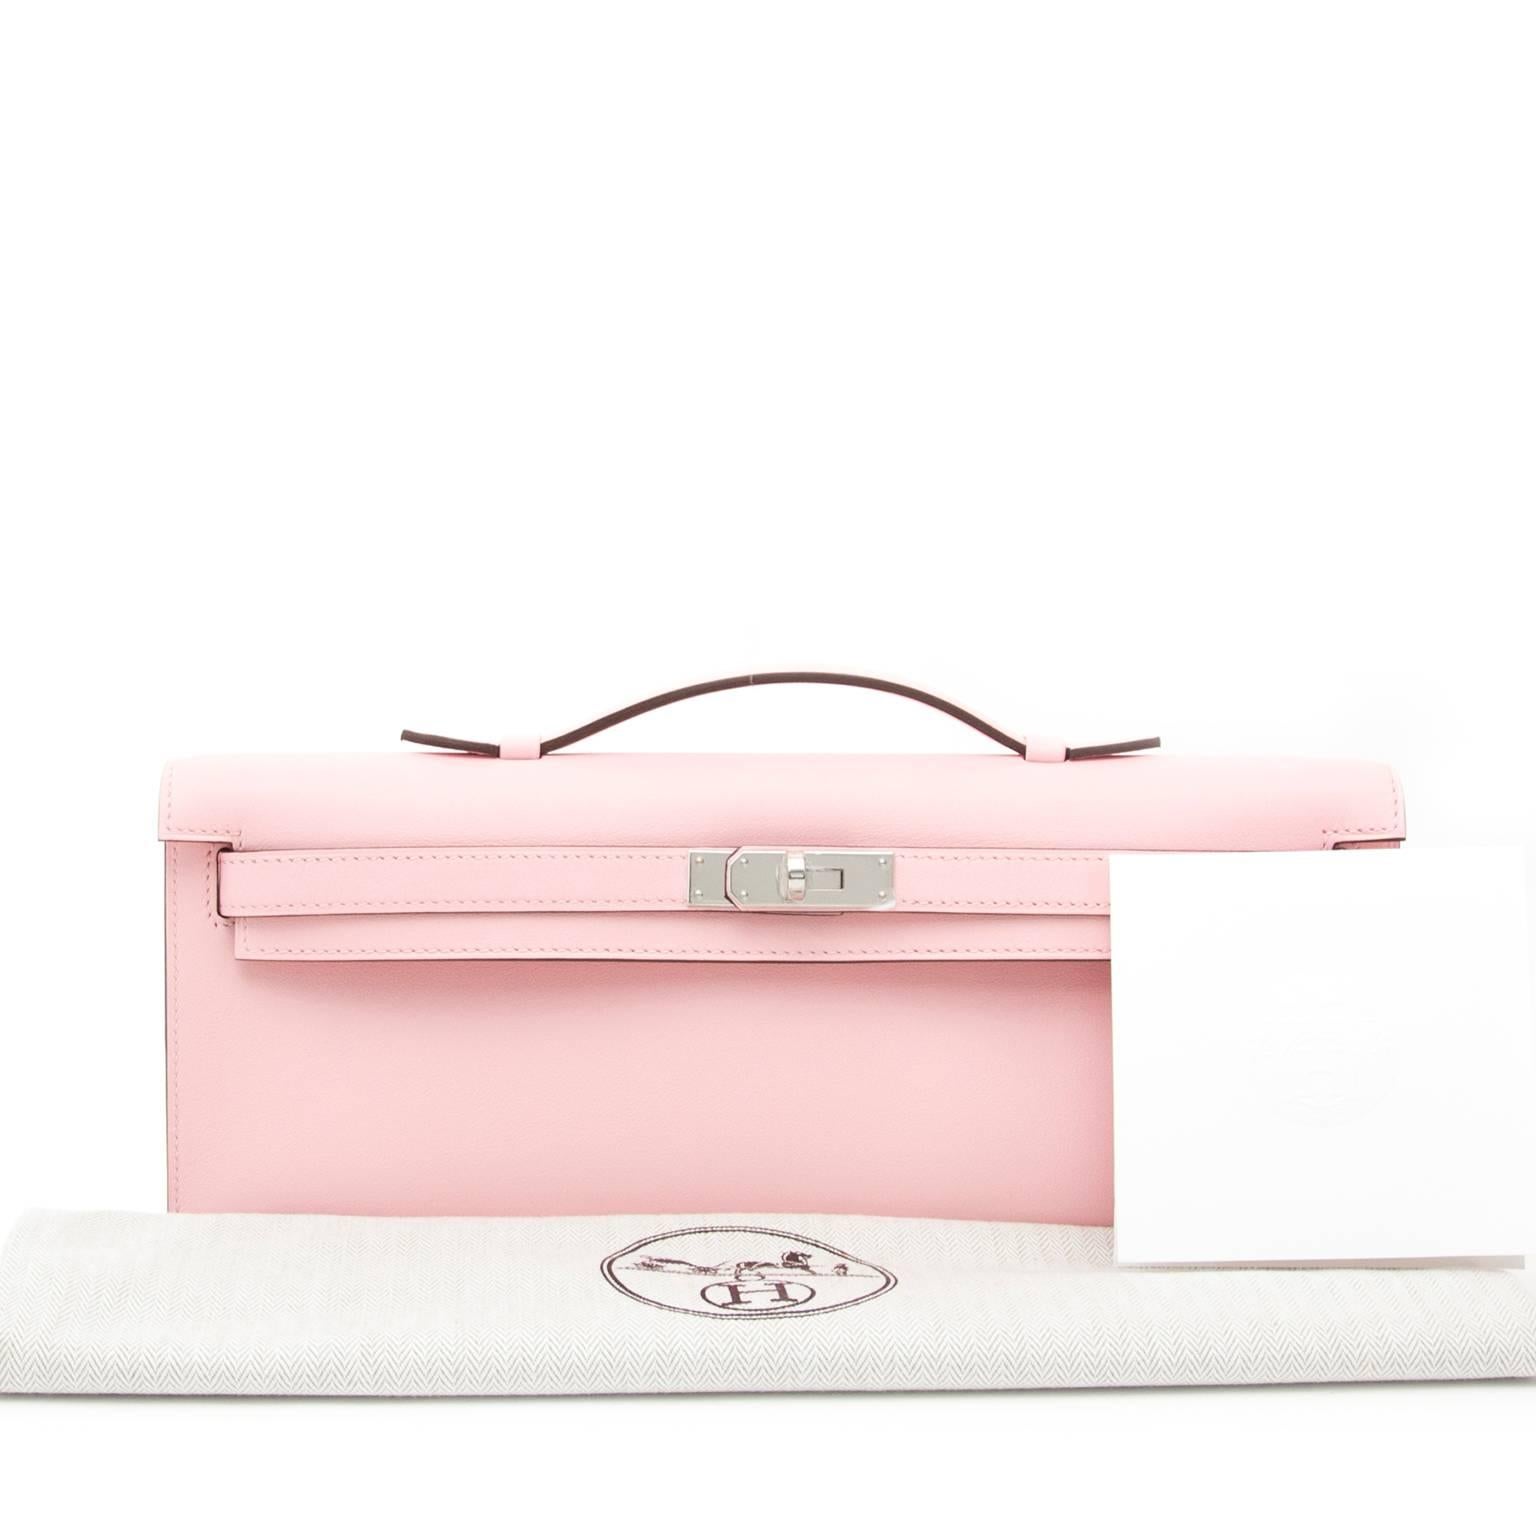 Hermès Kelly Cut Pochette Rose Sakura Swift .
Searching for an iconic Kelly in a clutch version? Meet this exquisite Hermès Kelly Cut Pochette. This perfect day and night piece is made of soft swift leather in Rose Sakura color accentuated with